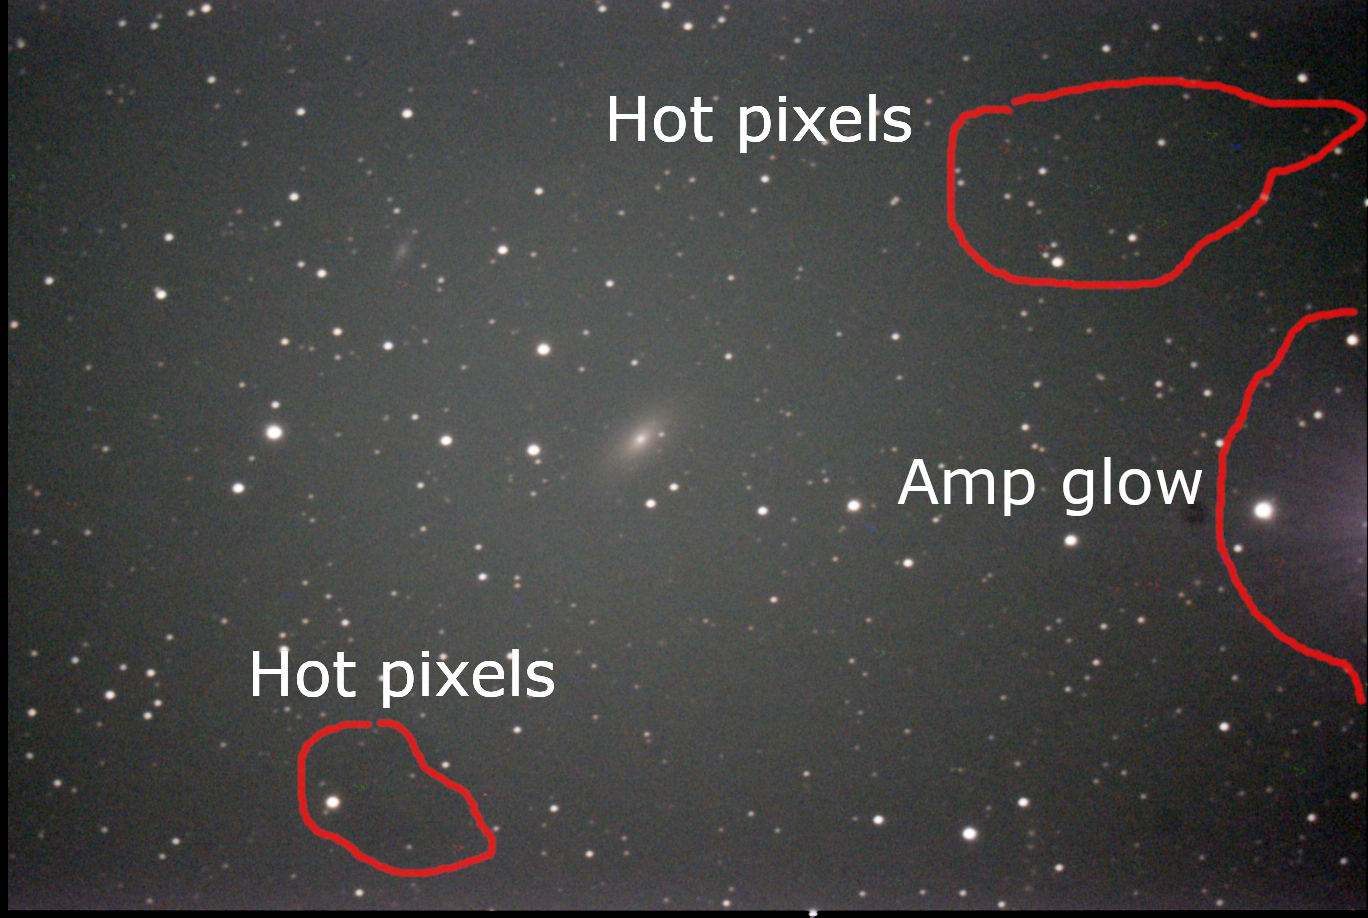 Picture of galaxies with image aberations like amplifier glow and hot pixels highlighted.